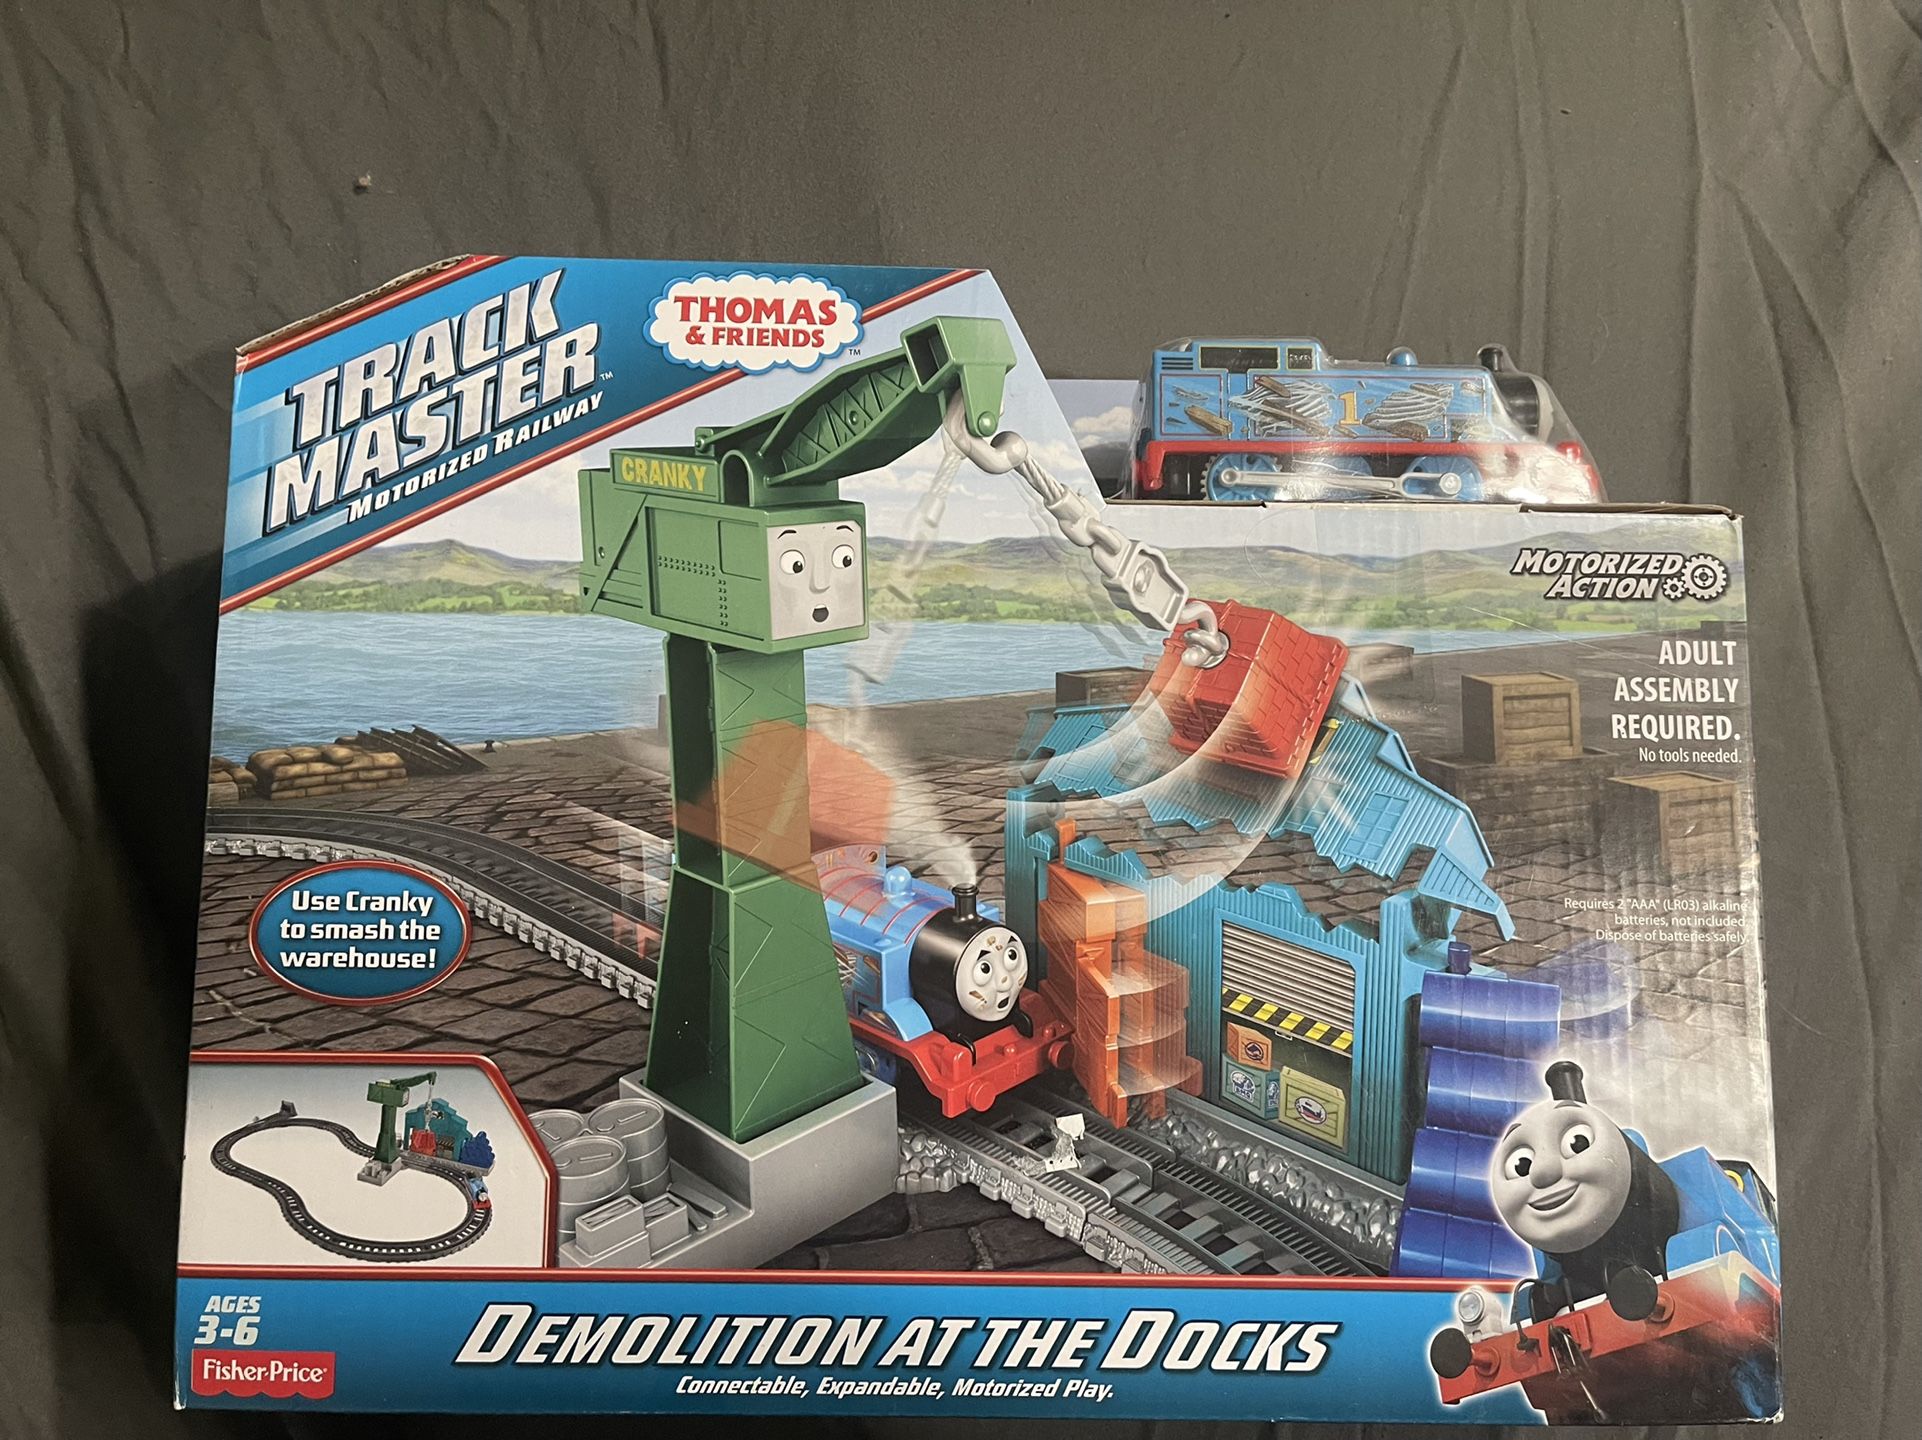 Track Master THOMAS & Friends Demolition At The Docks Playset Cranky Brand New